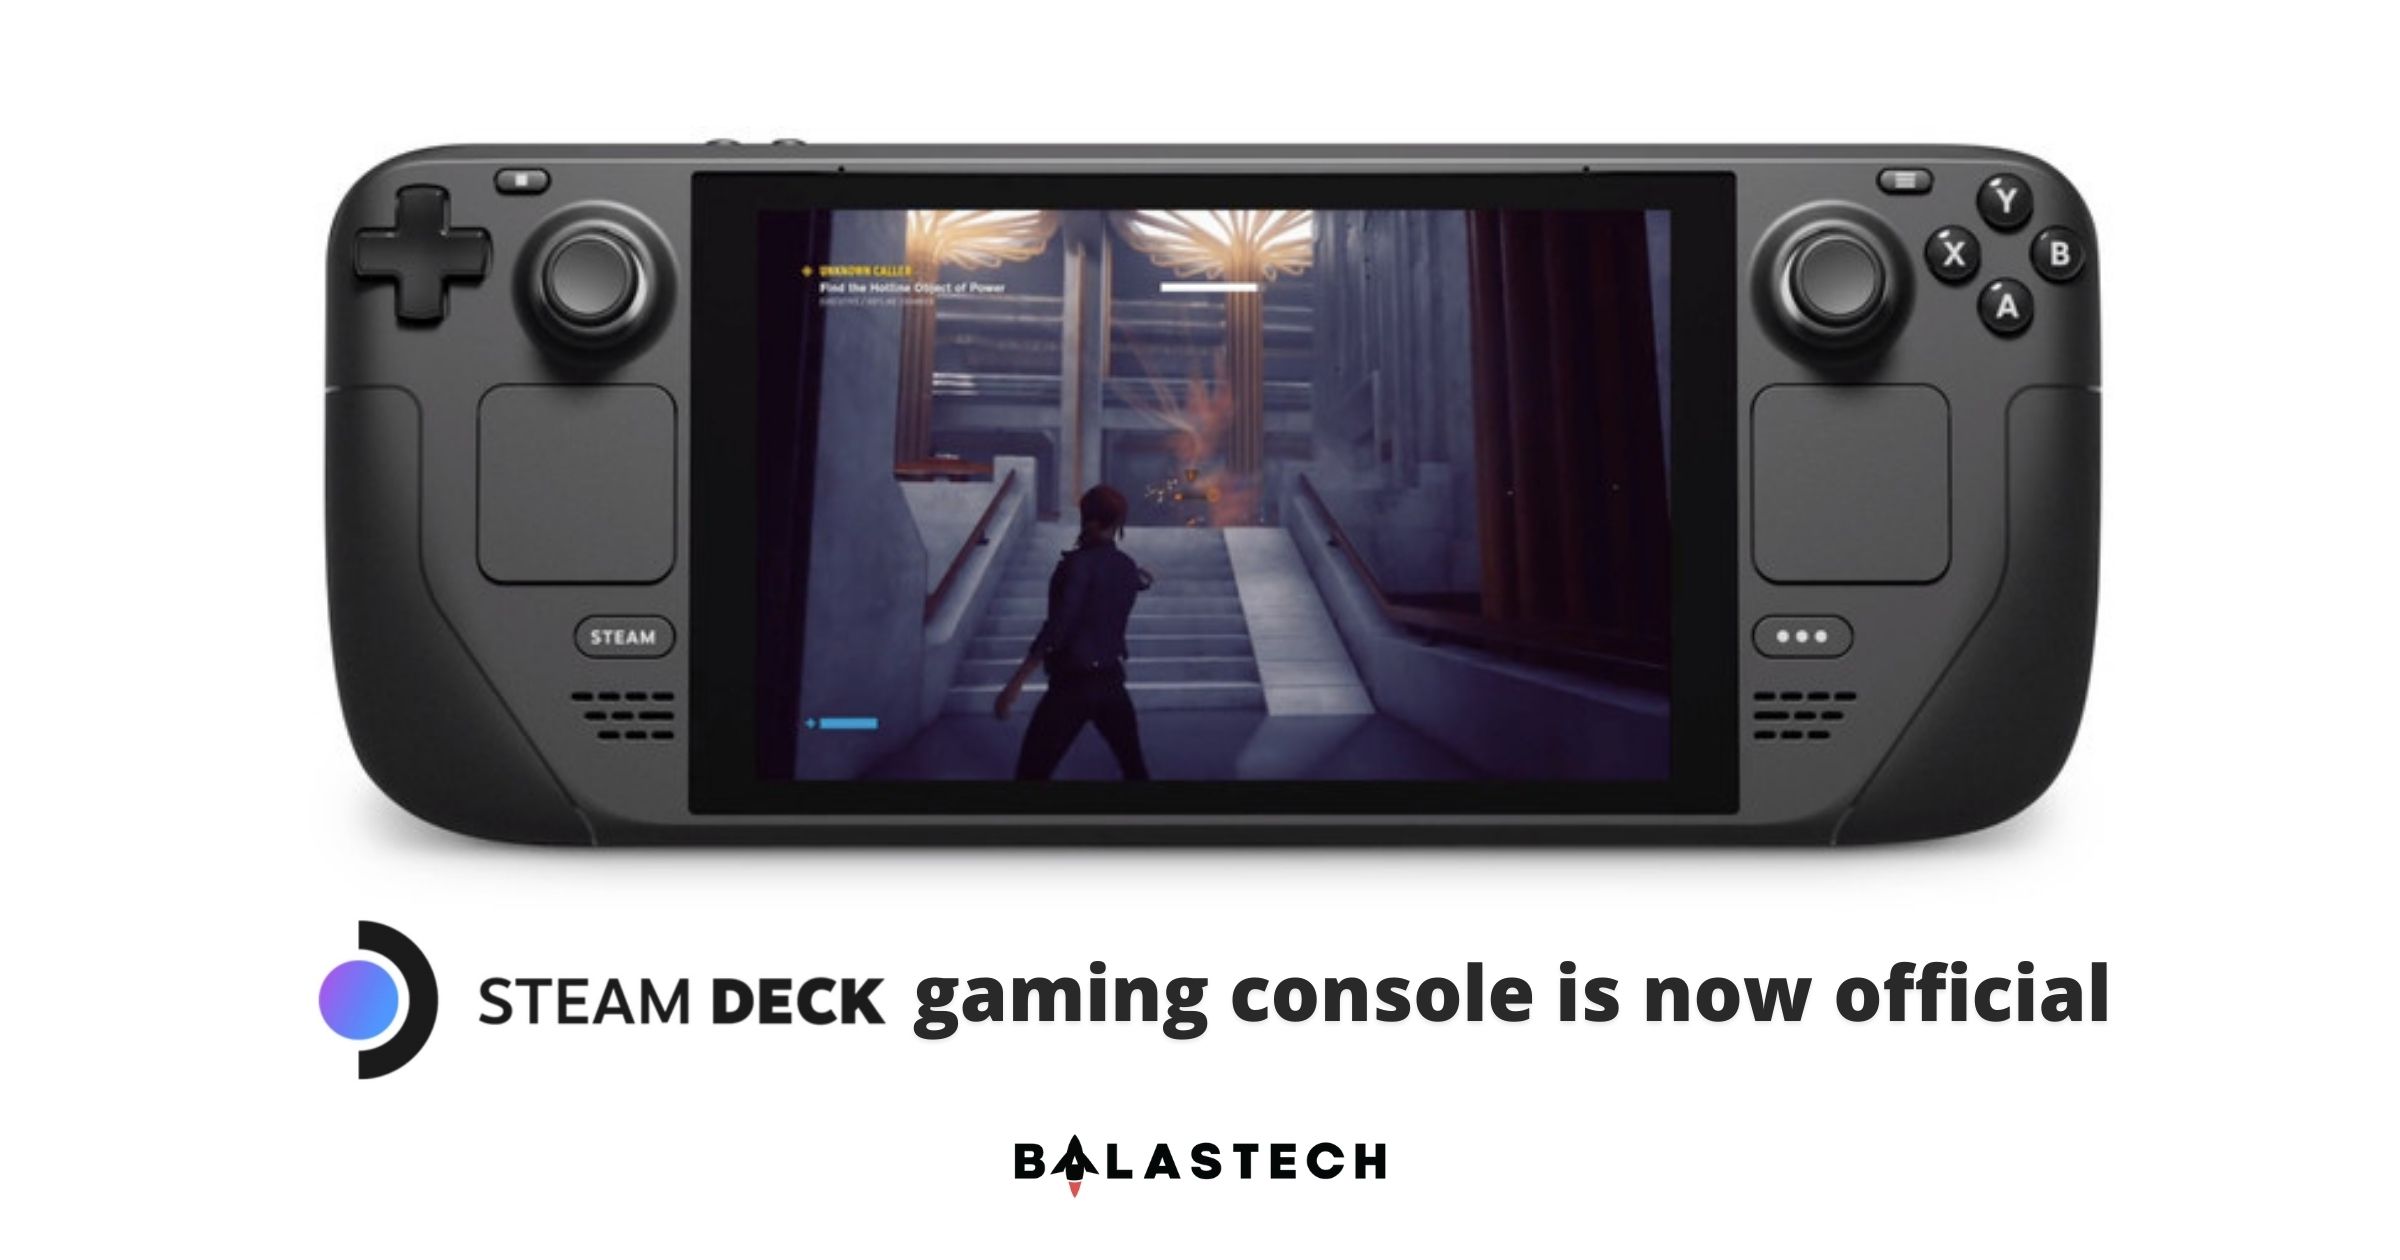 Valve's Steam Deck handheld gaming console is now official BALASTECH